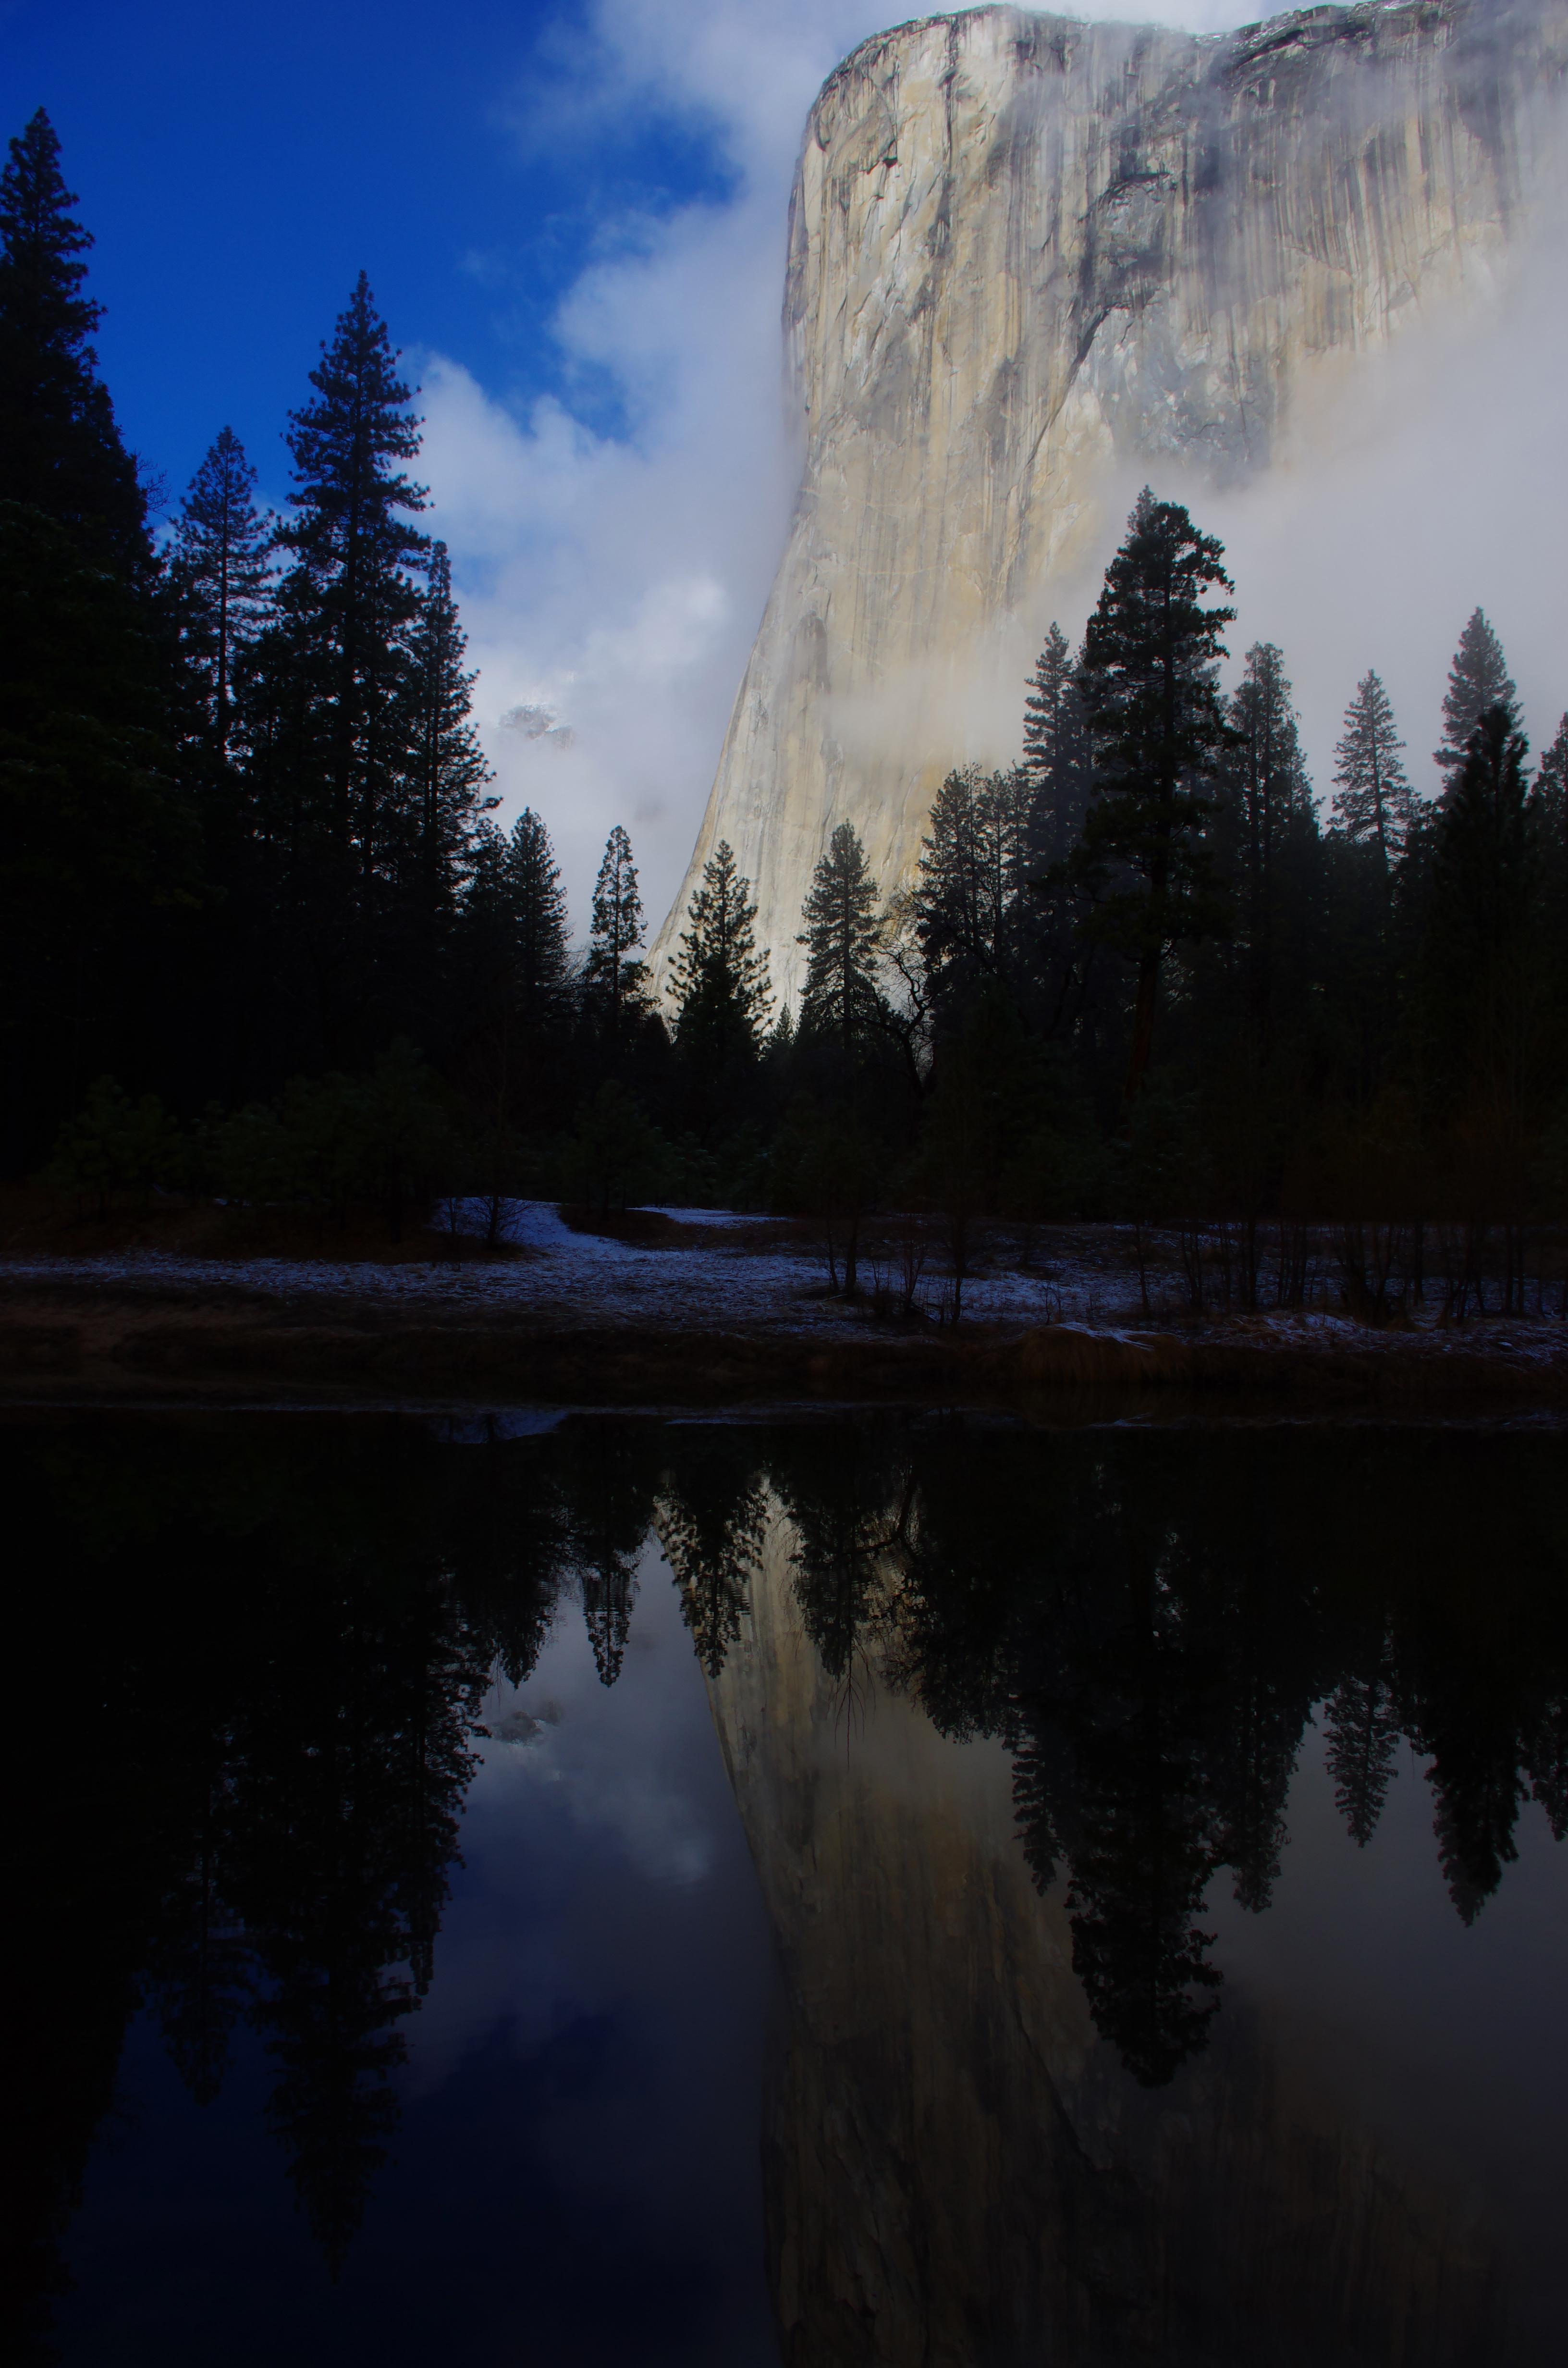 El Capitan and reflection in Merced River with some low clouds